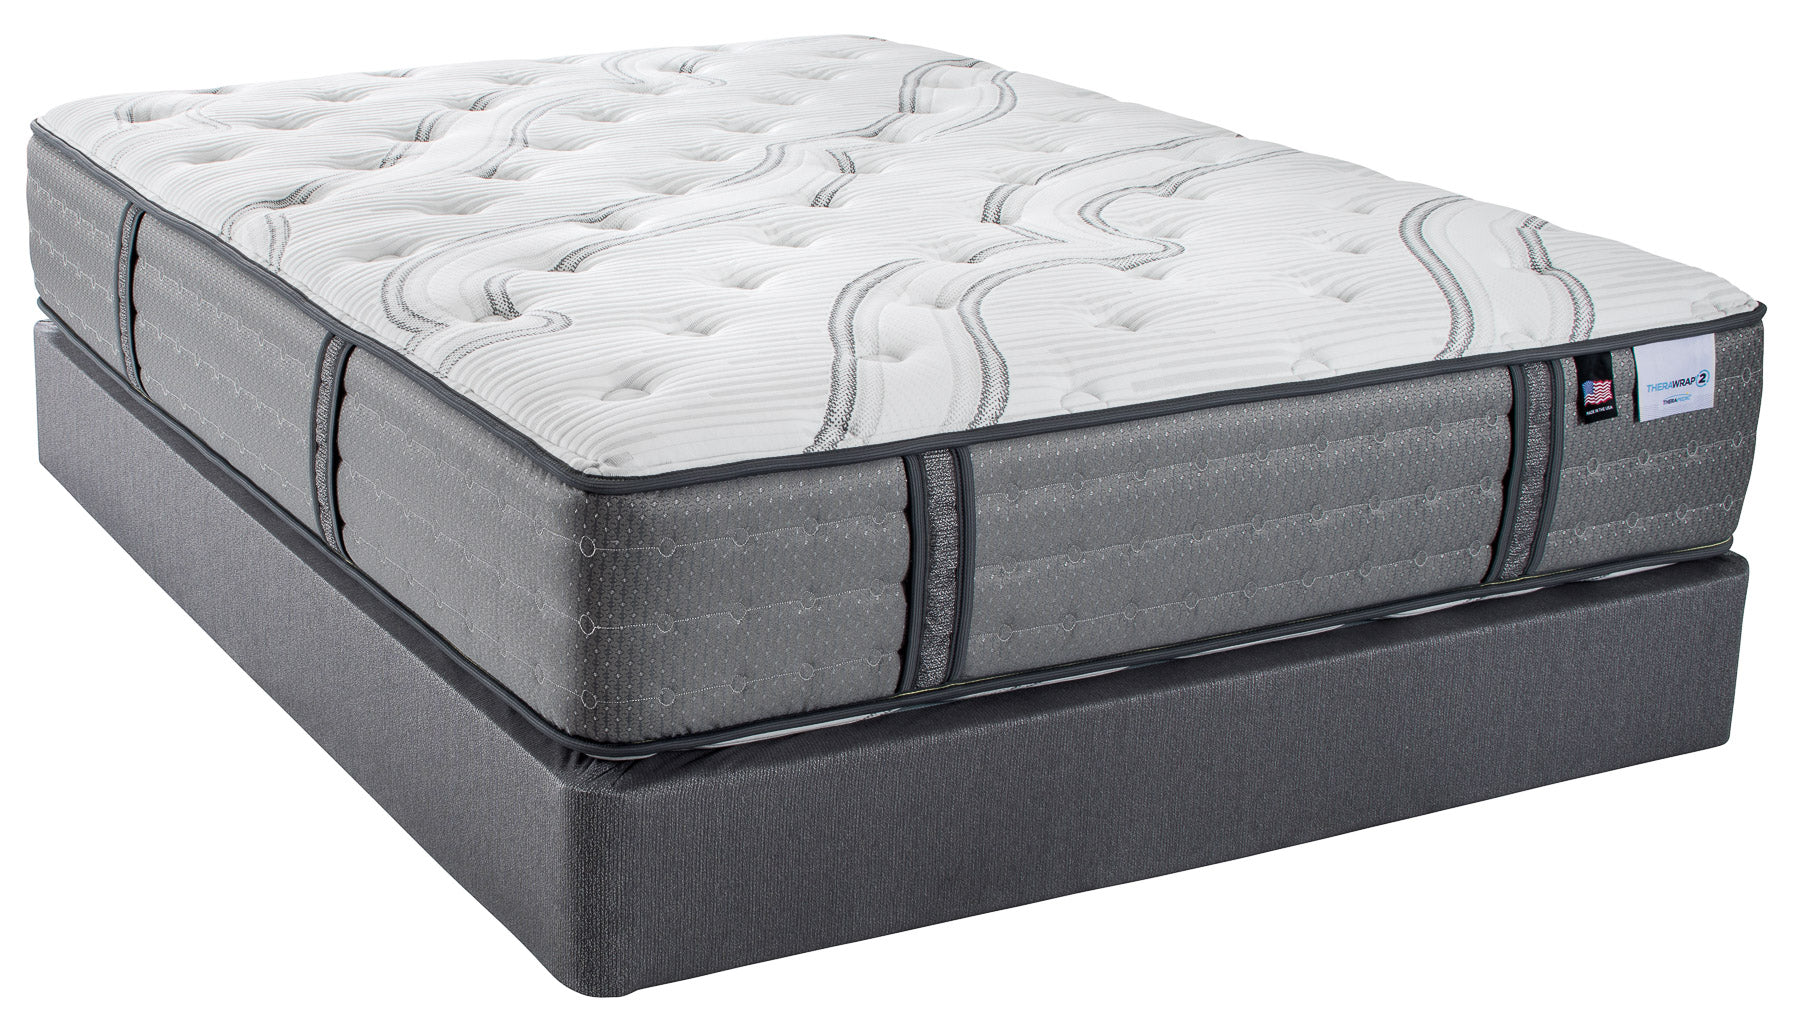 old fashioned mattress that you can flip over